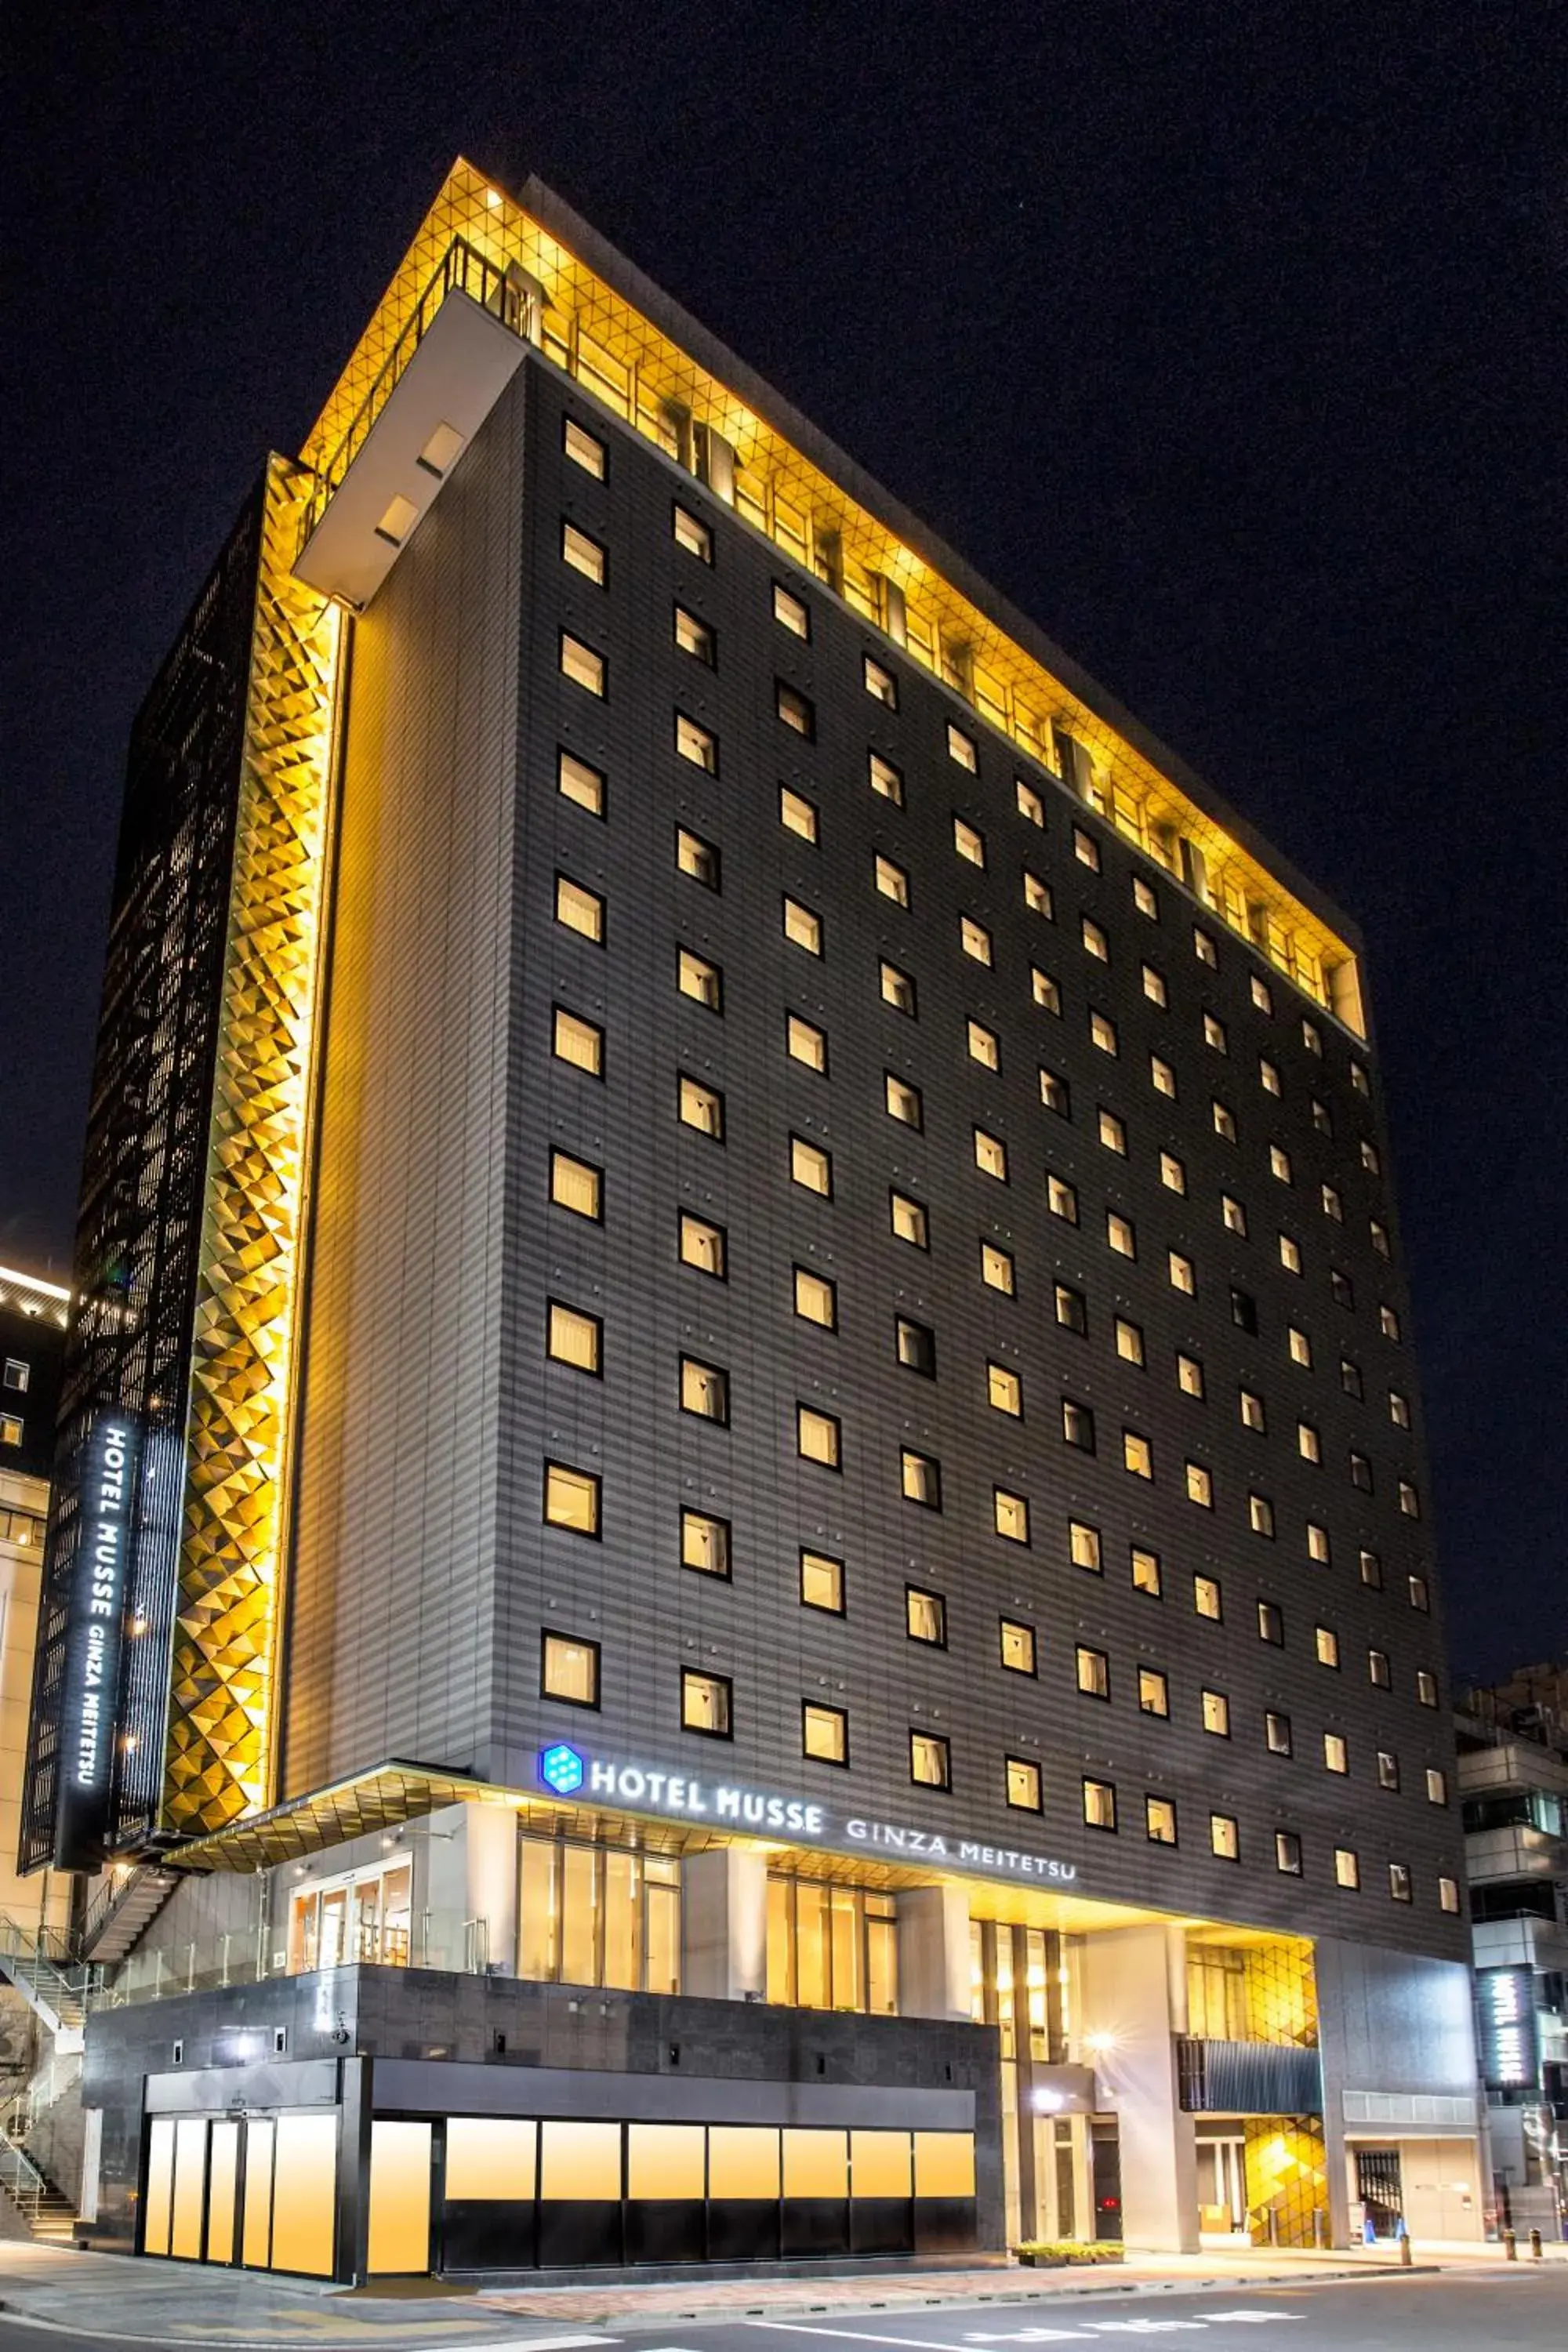 Property Building in HOTEL MUSSE GINZA MEITETSU